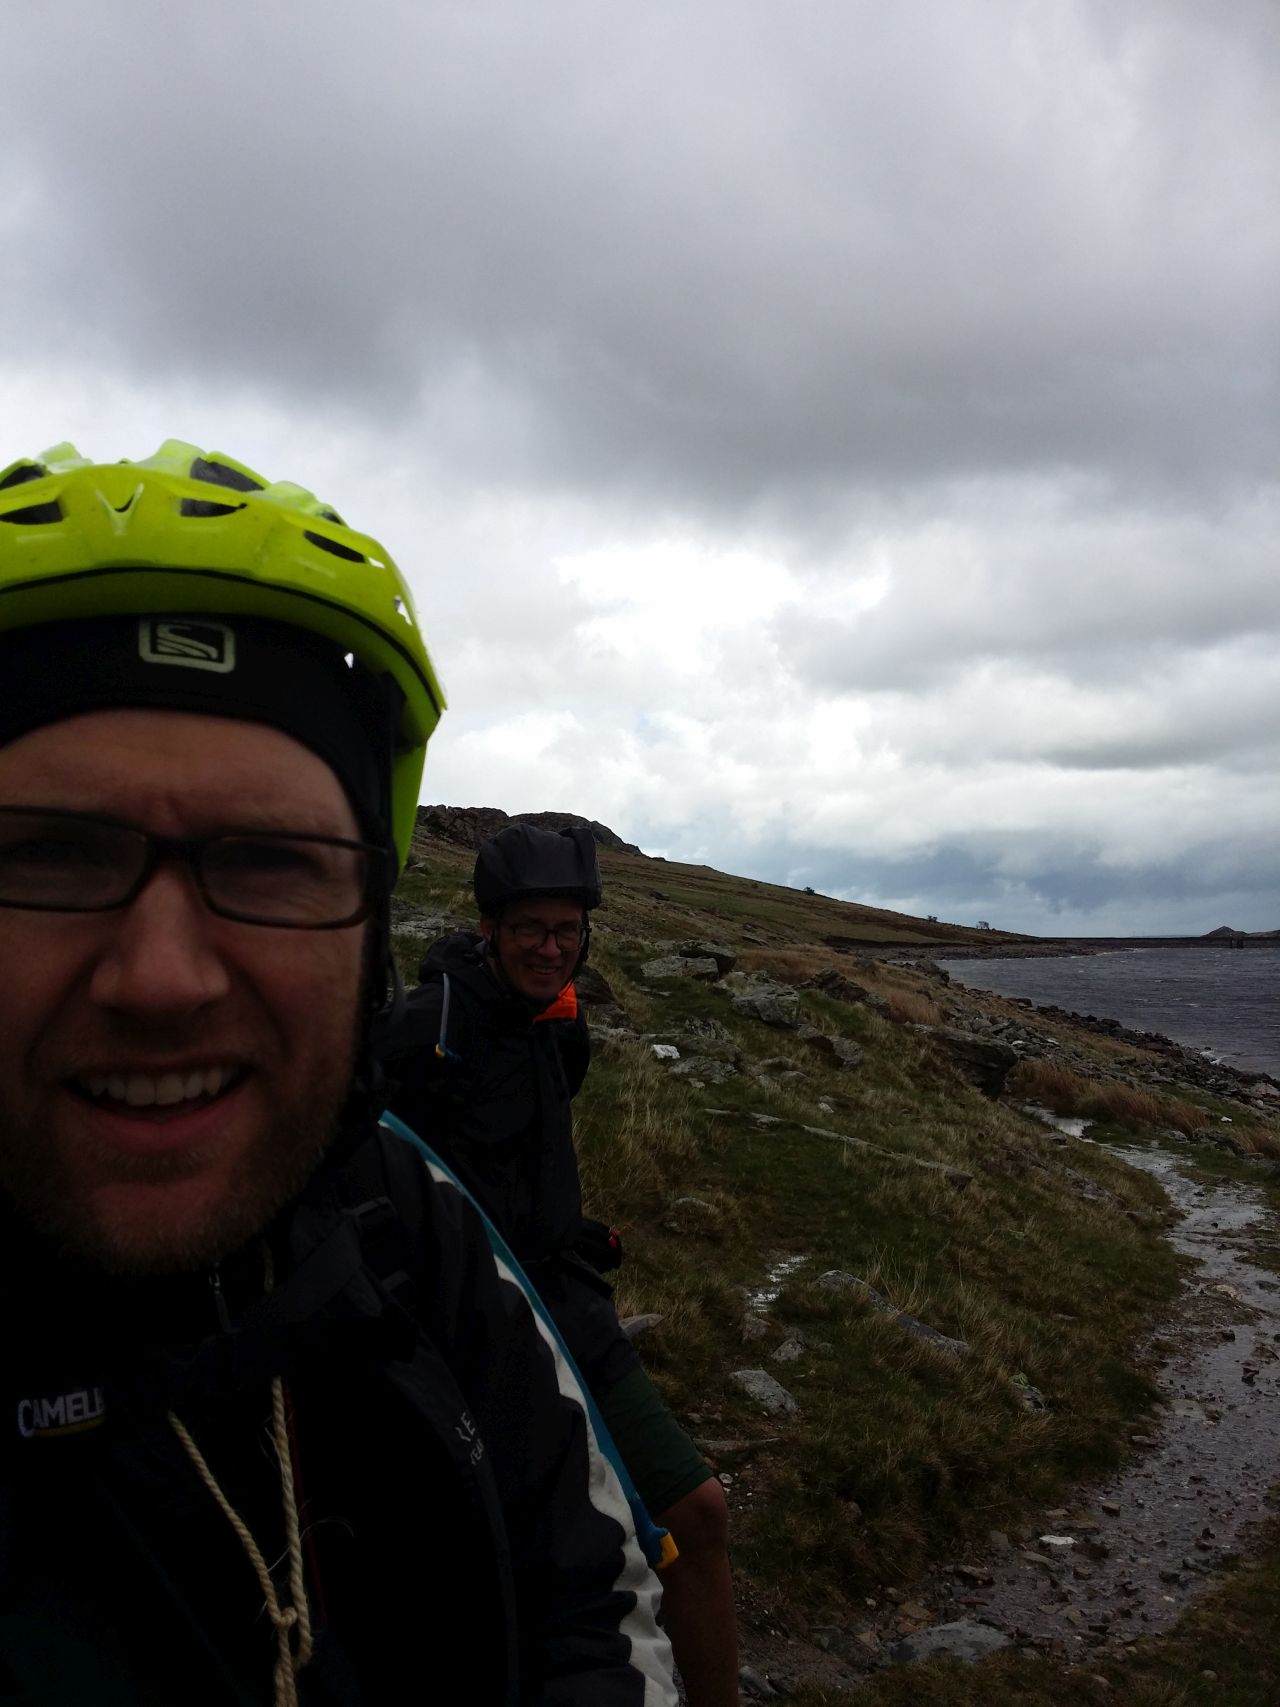 Day 1 - In gale force head winds and driving rain along Llyn Cowlyd reservoir